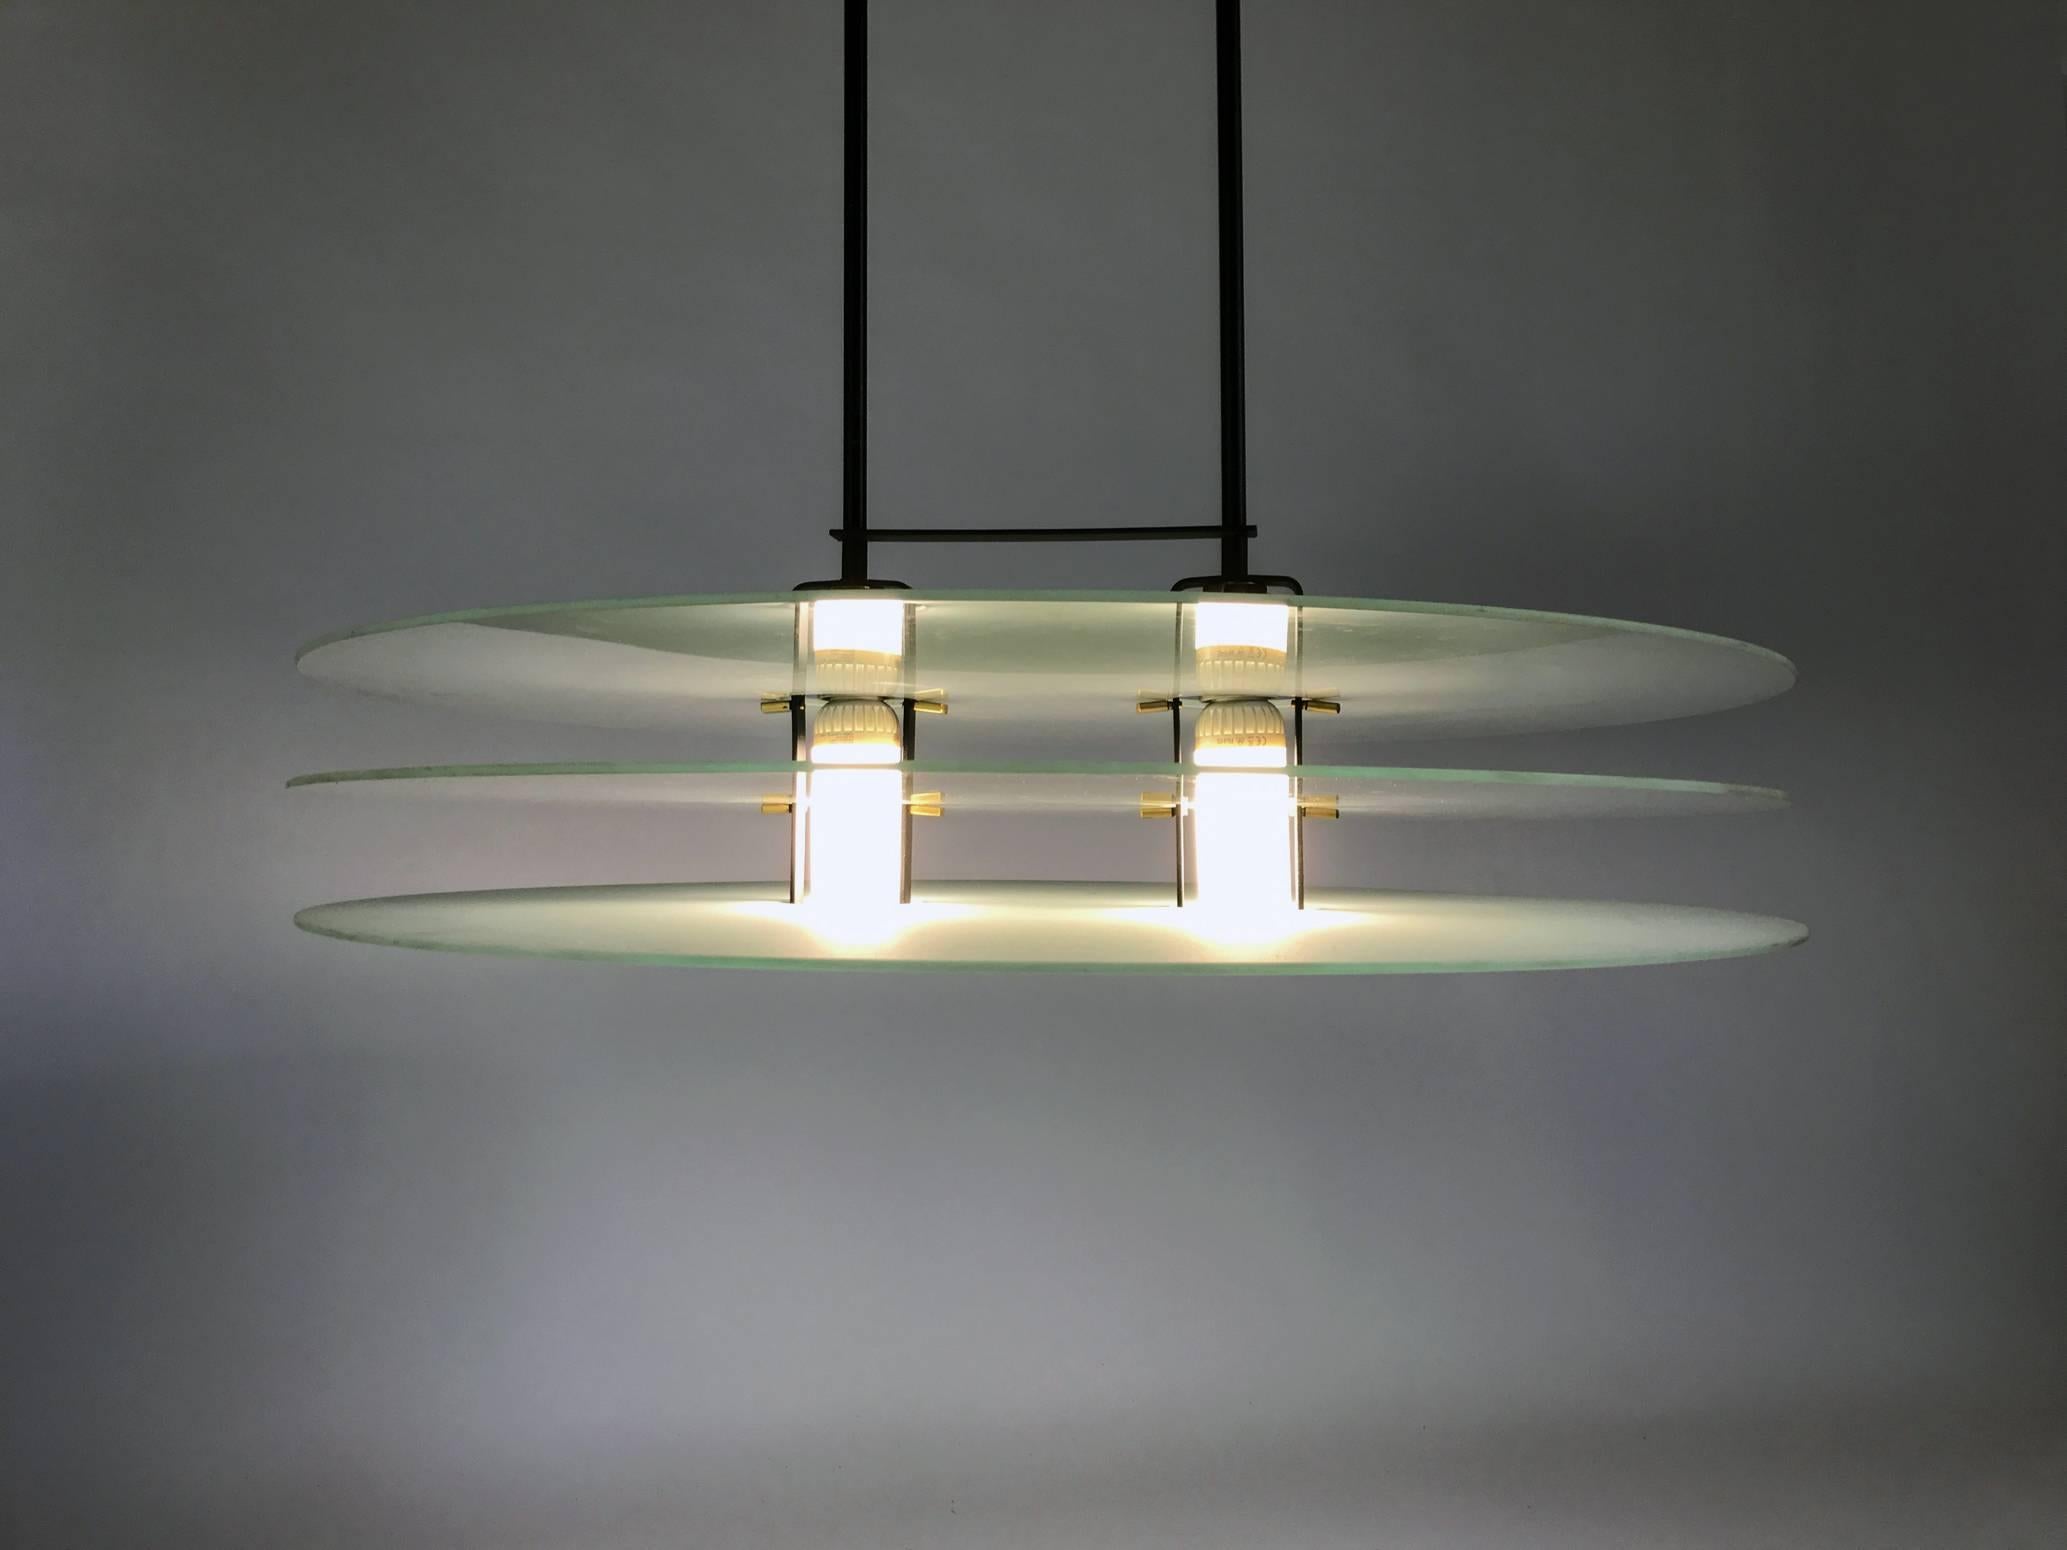 Late 20th Century  Chandelier by Mario Barbaglia and Marco Colombo for PAF Studio, Milano